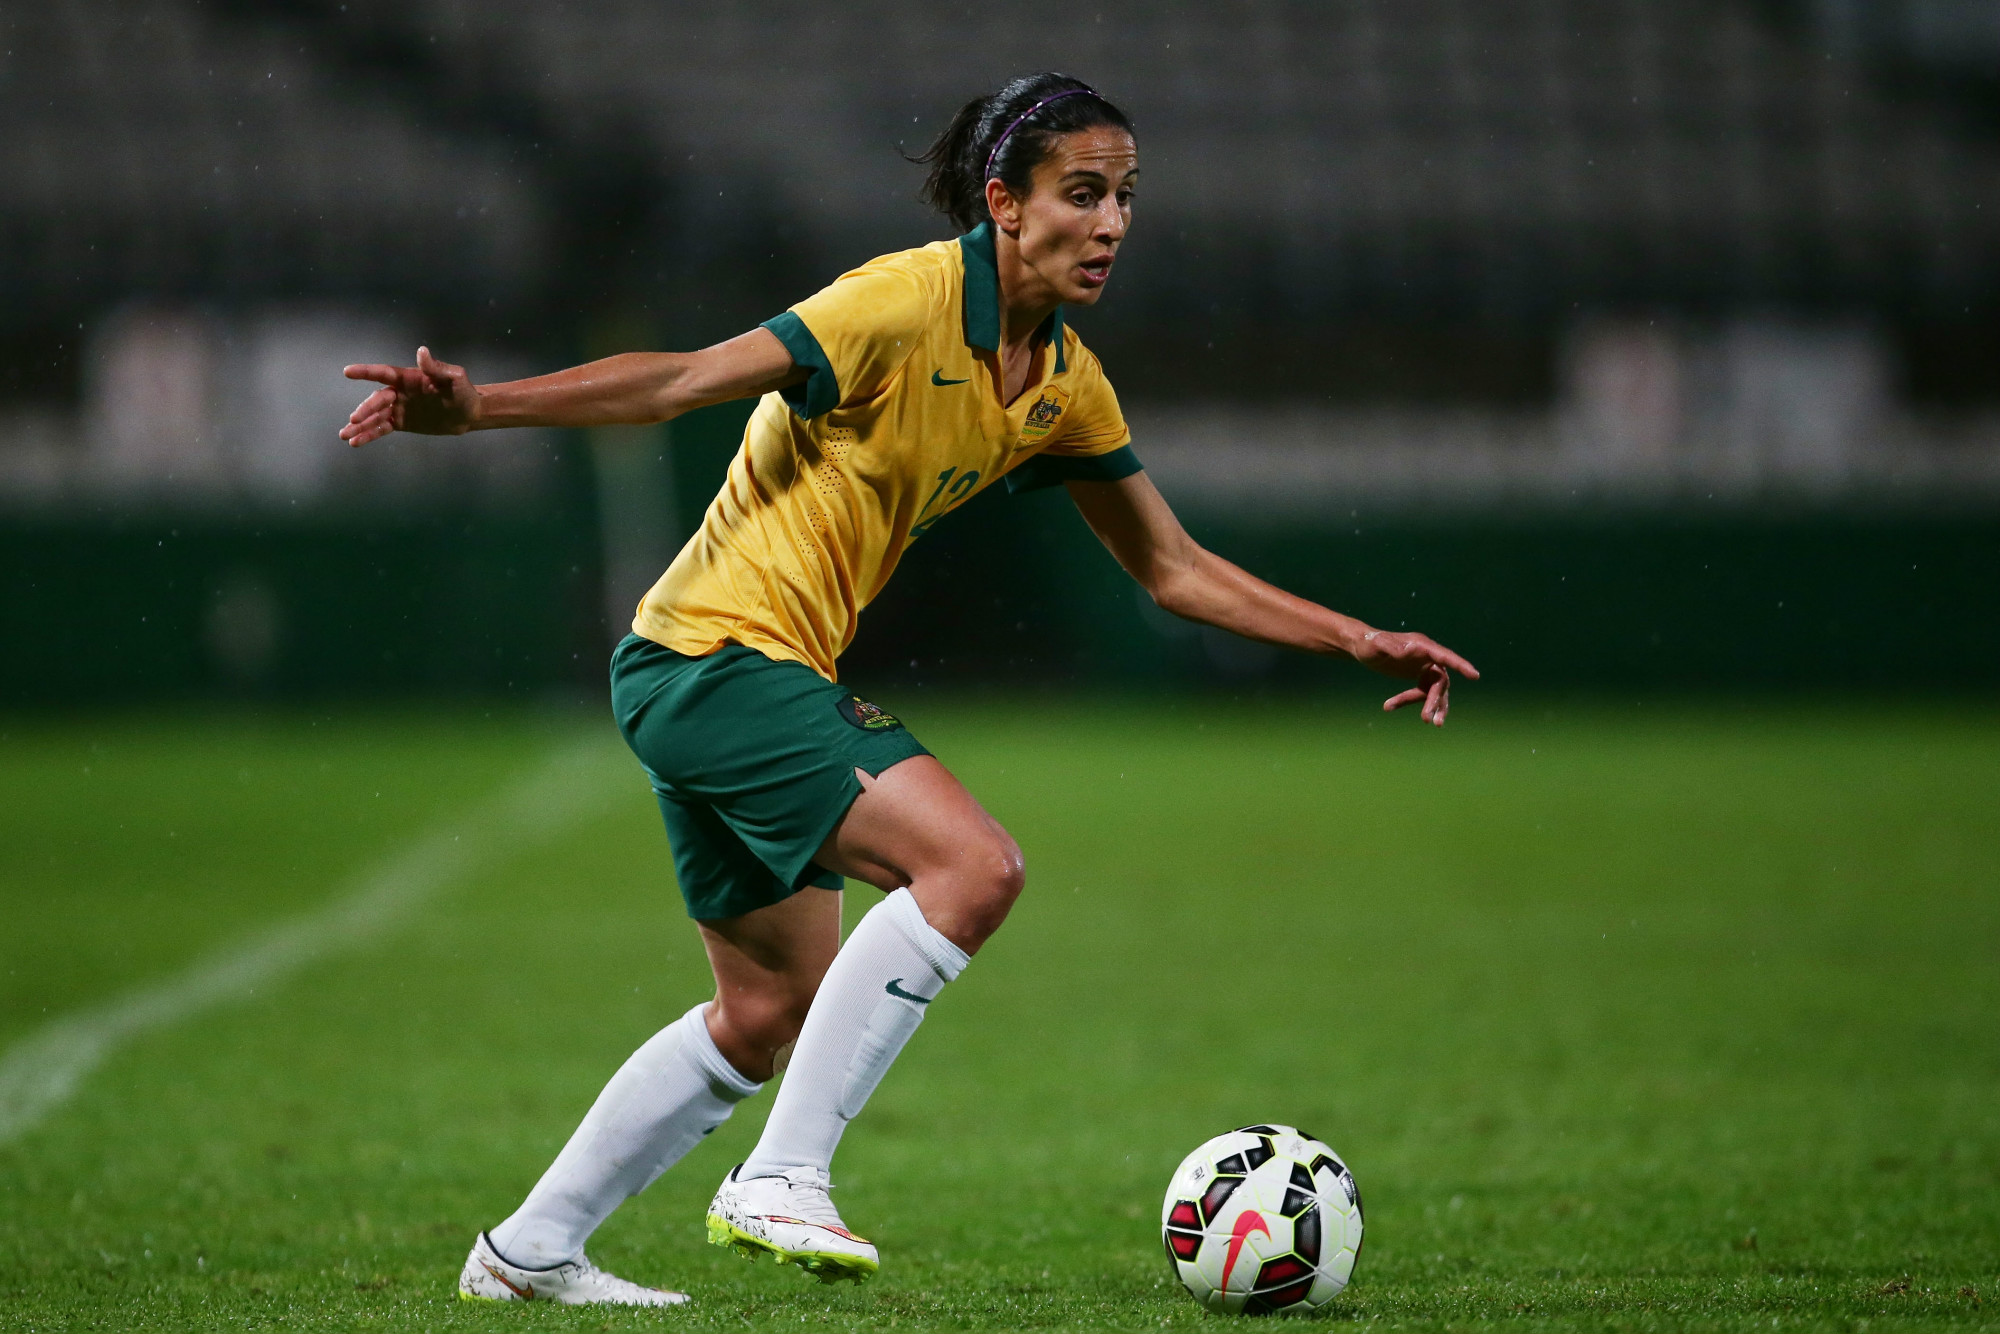 Khamis playing for the Westfield Matildas